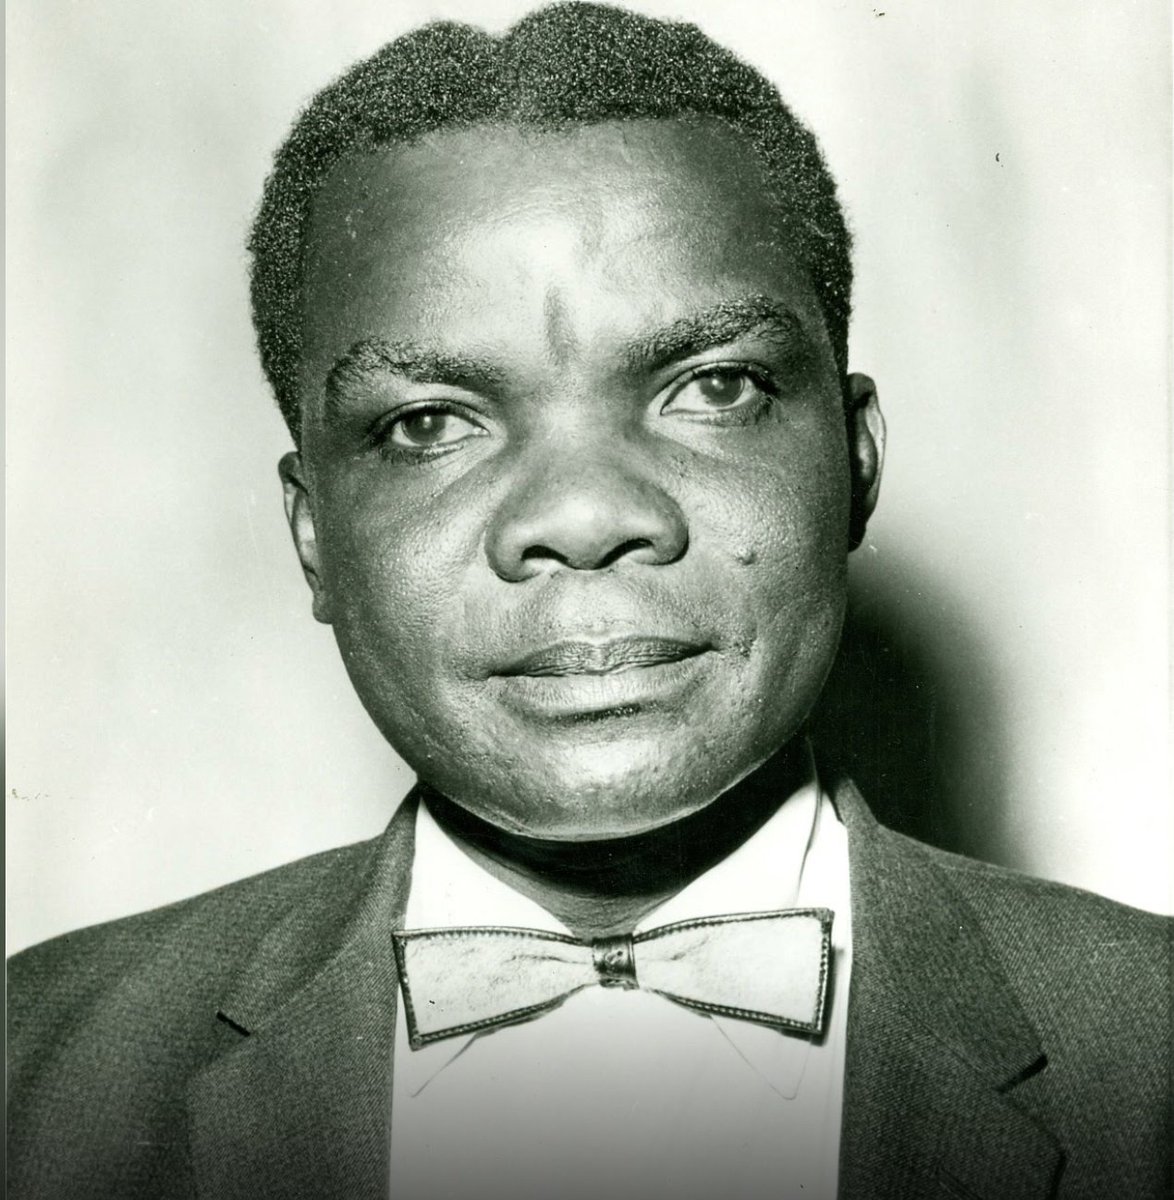 4/In 1963, President Kenyatta appointed Argwings-Kodhek an assistant minister for Defence.In 1966, he joined the Cabinet as the Minister of Natural Resources and eventually in 1967 as Minister of State for Foreign Affairs.He died in a road accident in 1969